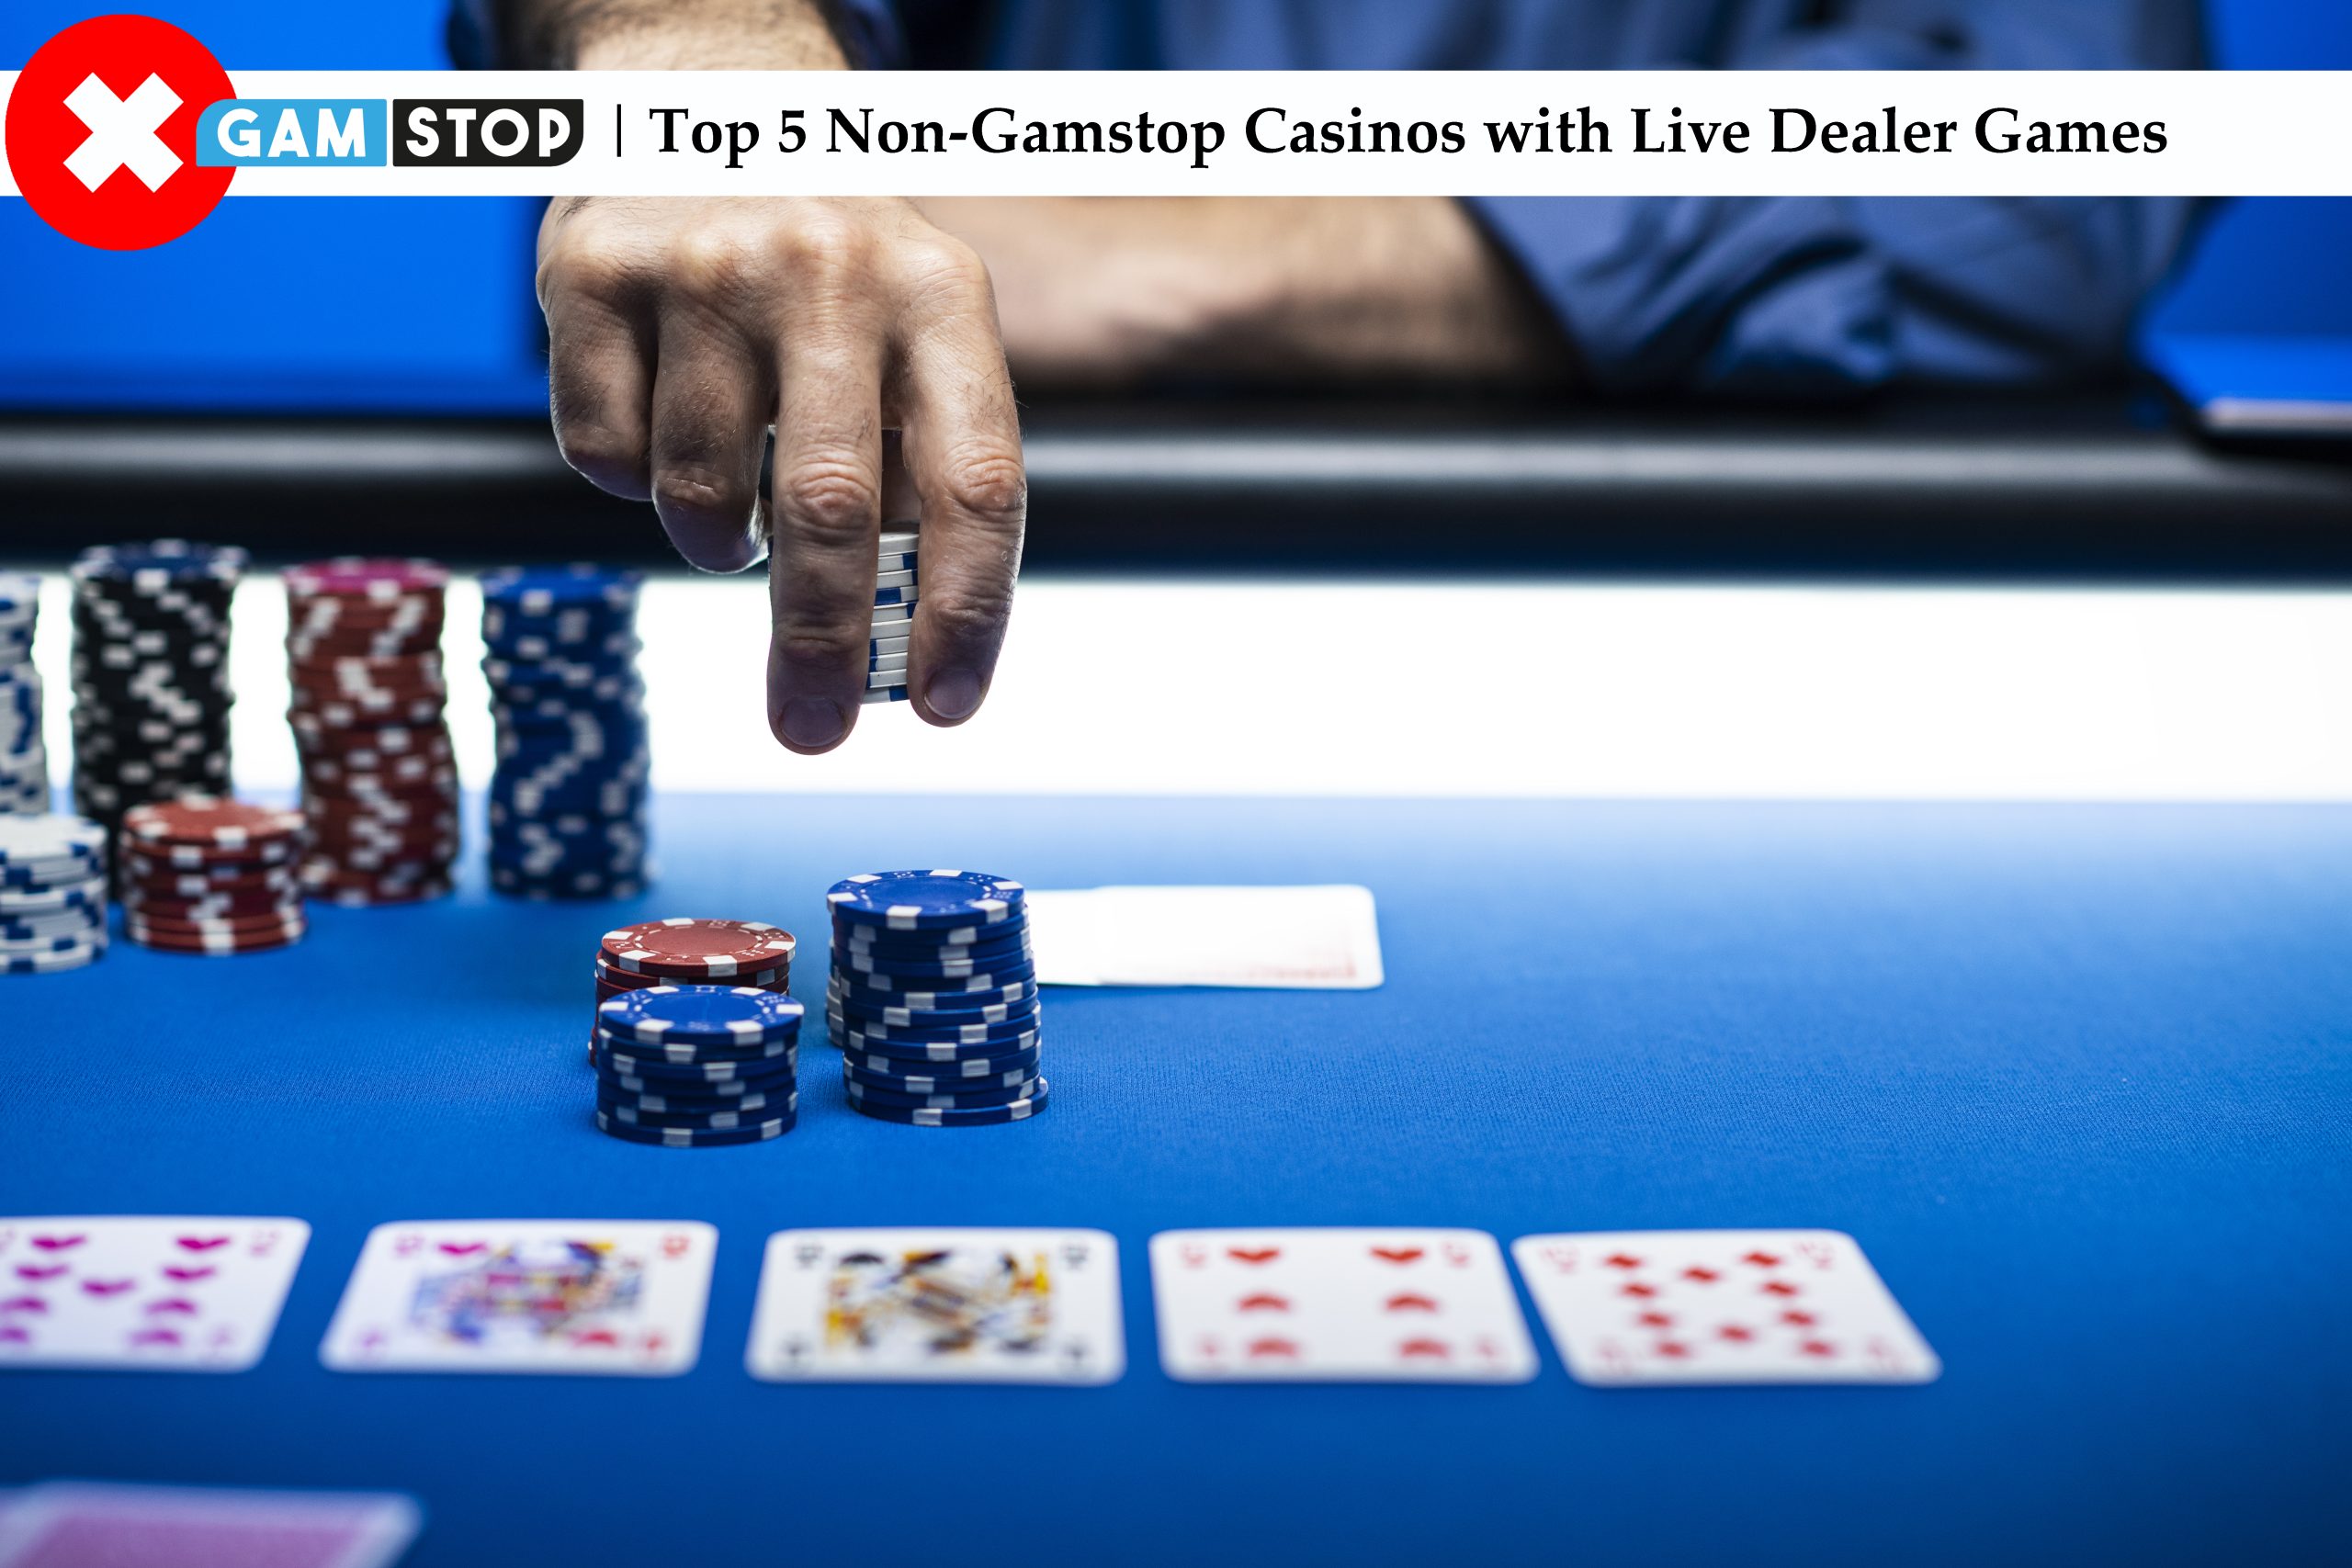 Top 5 Non-Gamstop Casinos with Live Dealer Games